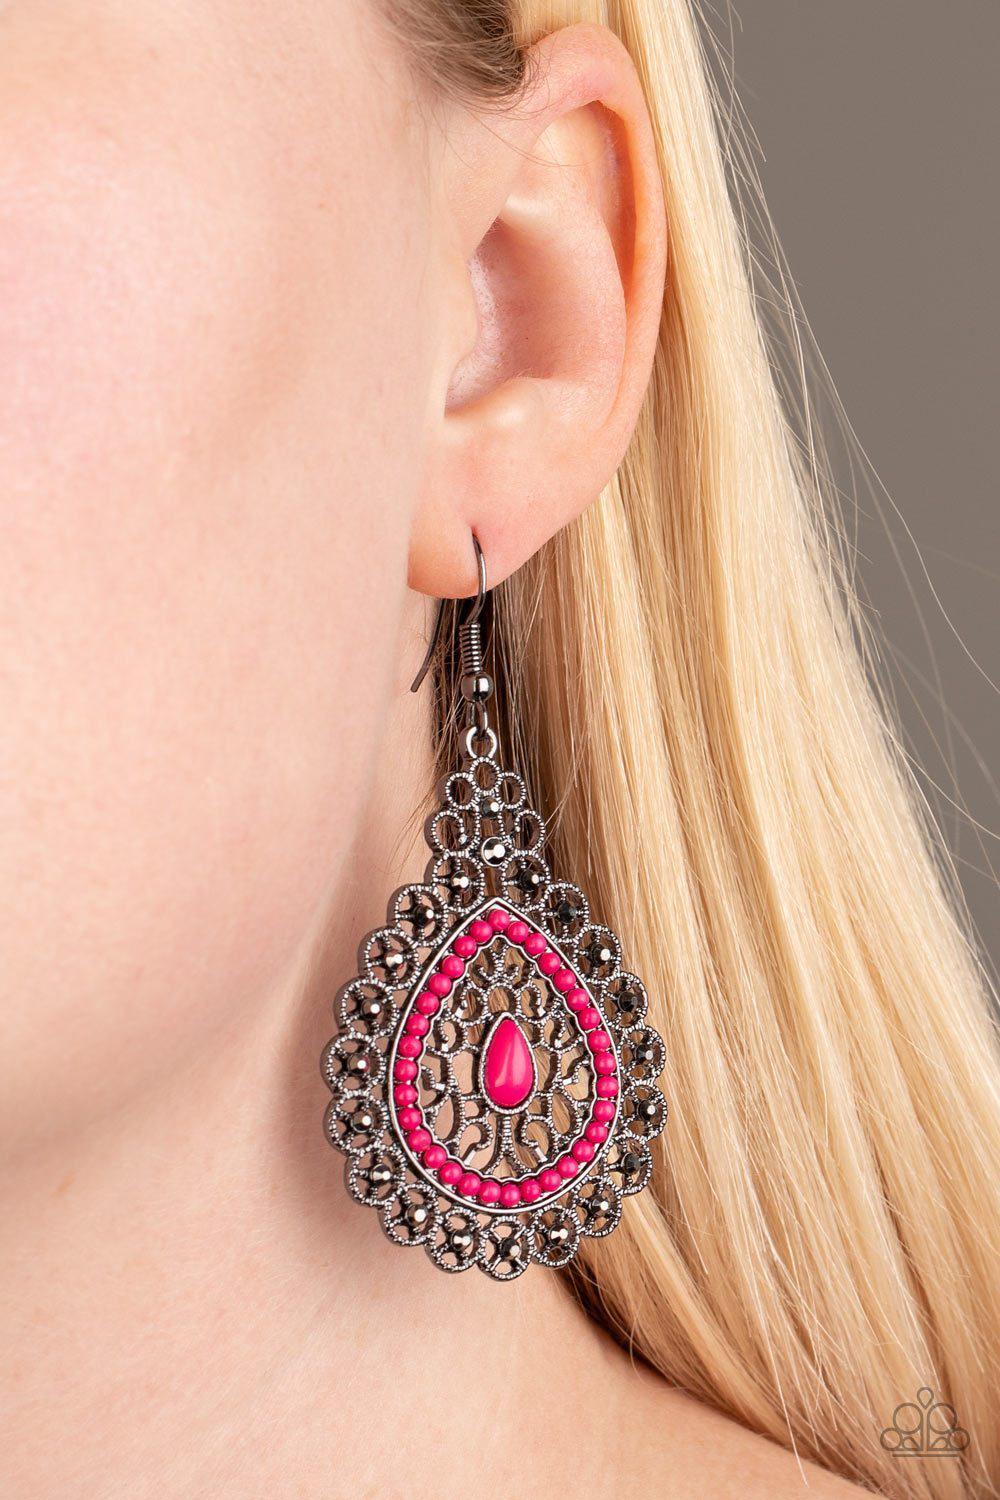 Carnival Courtesan Pink and Gunmetal Earrings - Paparazzi Accessories - model -CarasShop.com - $5 Jewelry by Cara Jewels